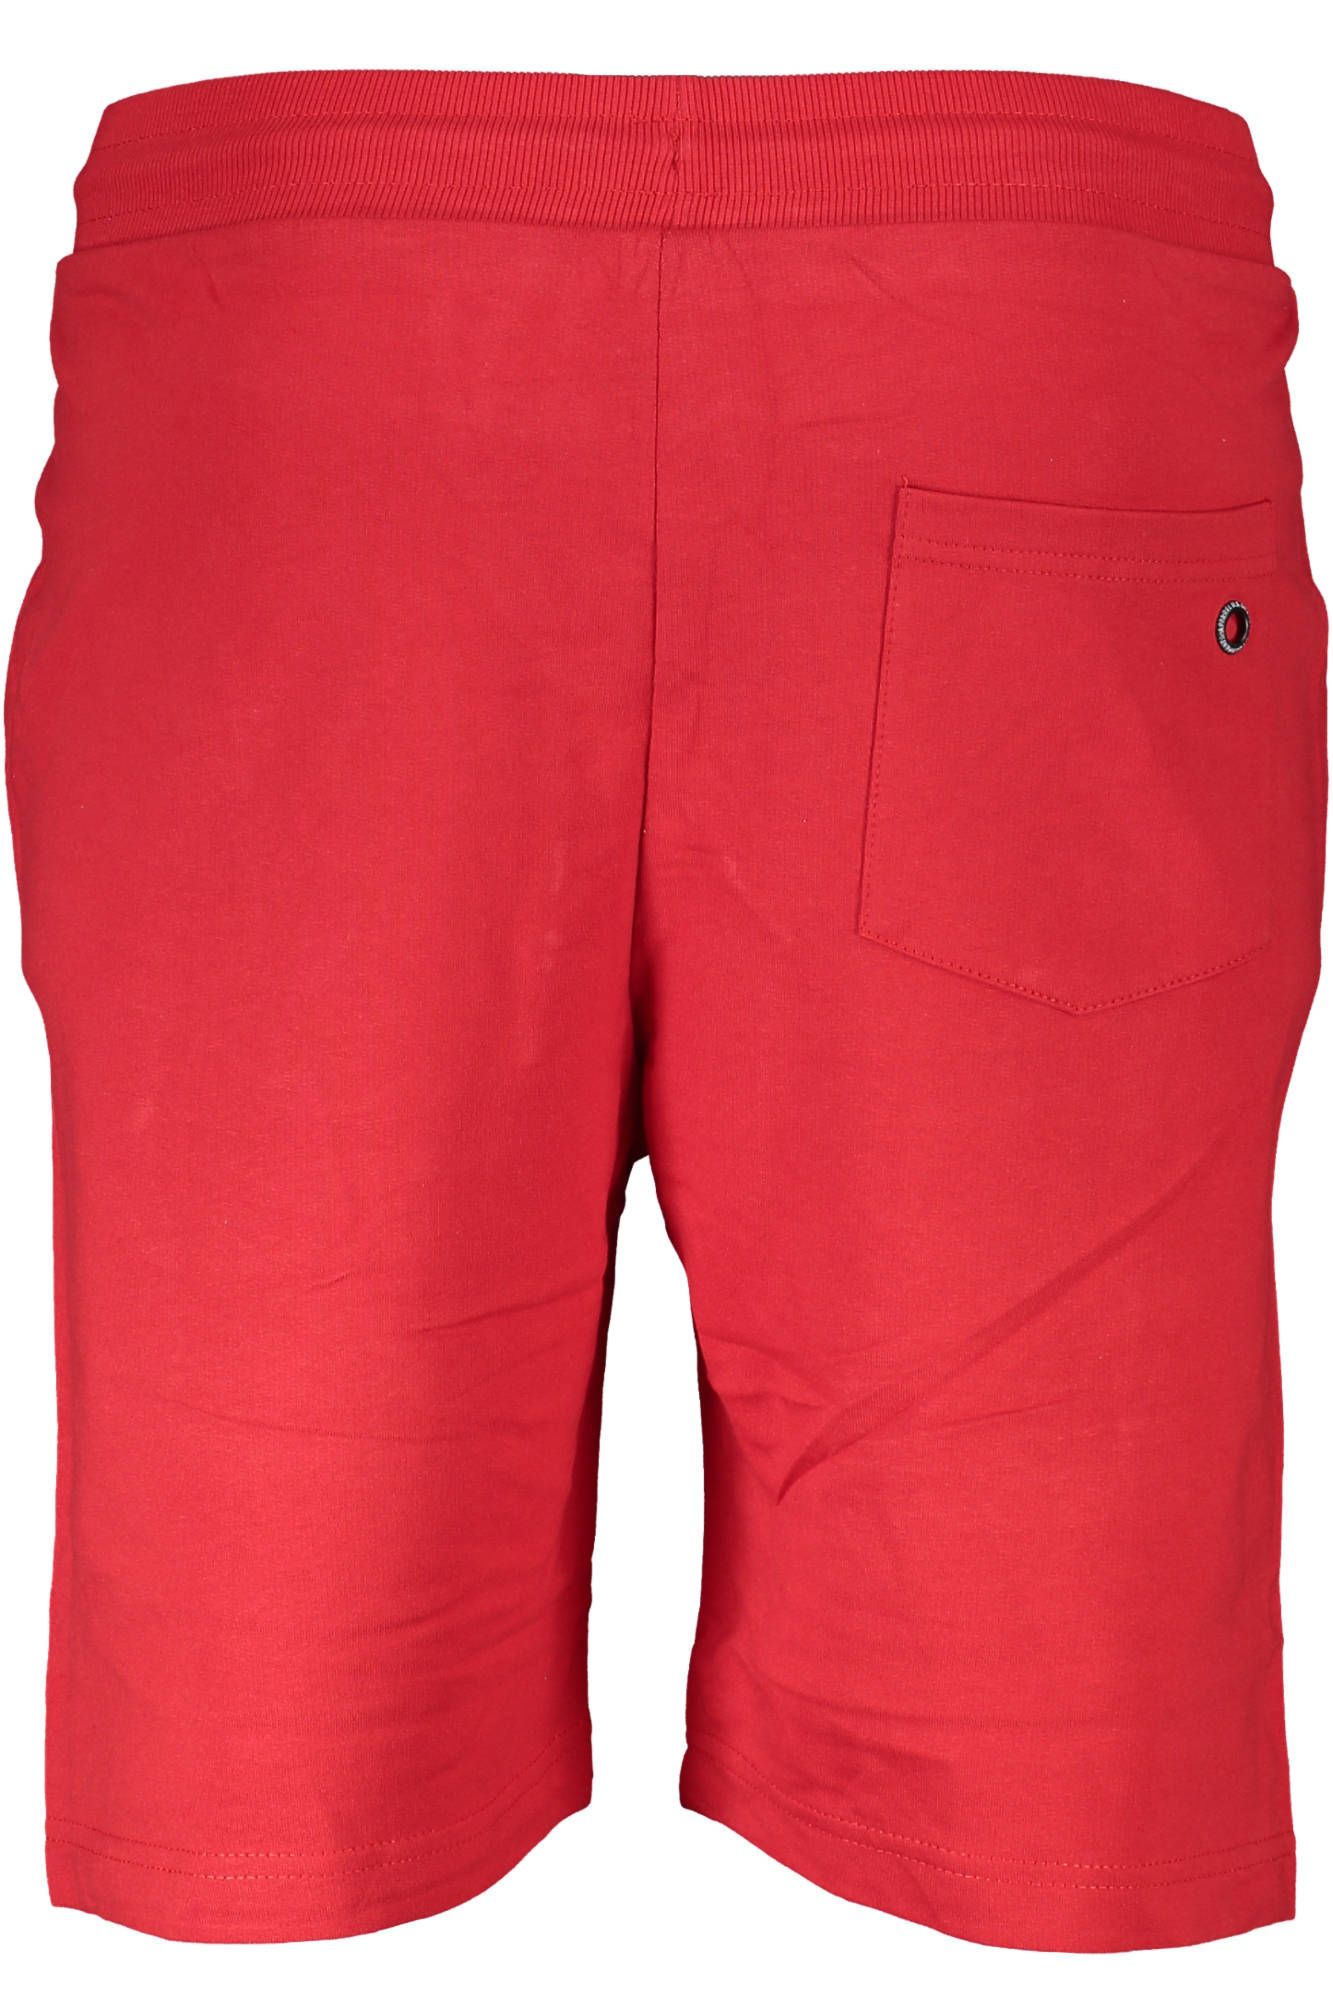 Sporty Red Cotton Shorts with Logo Embroidery